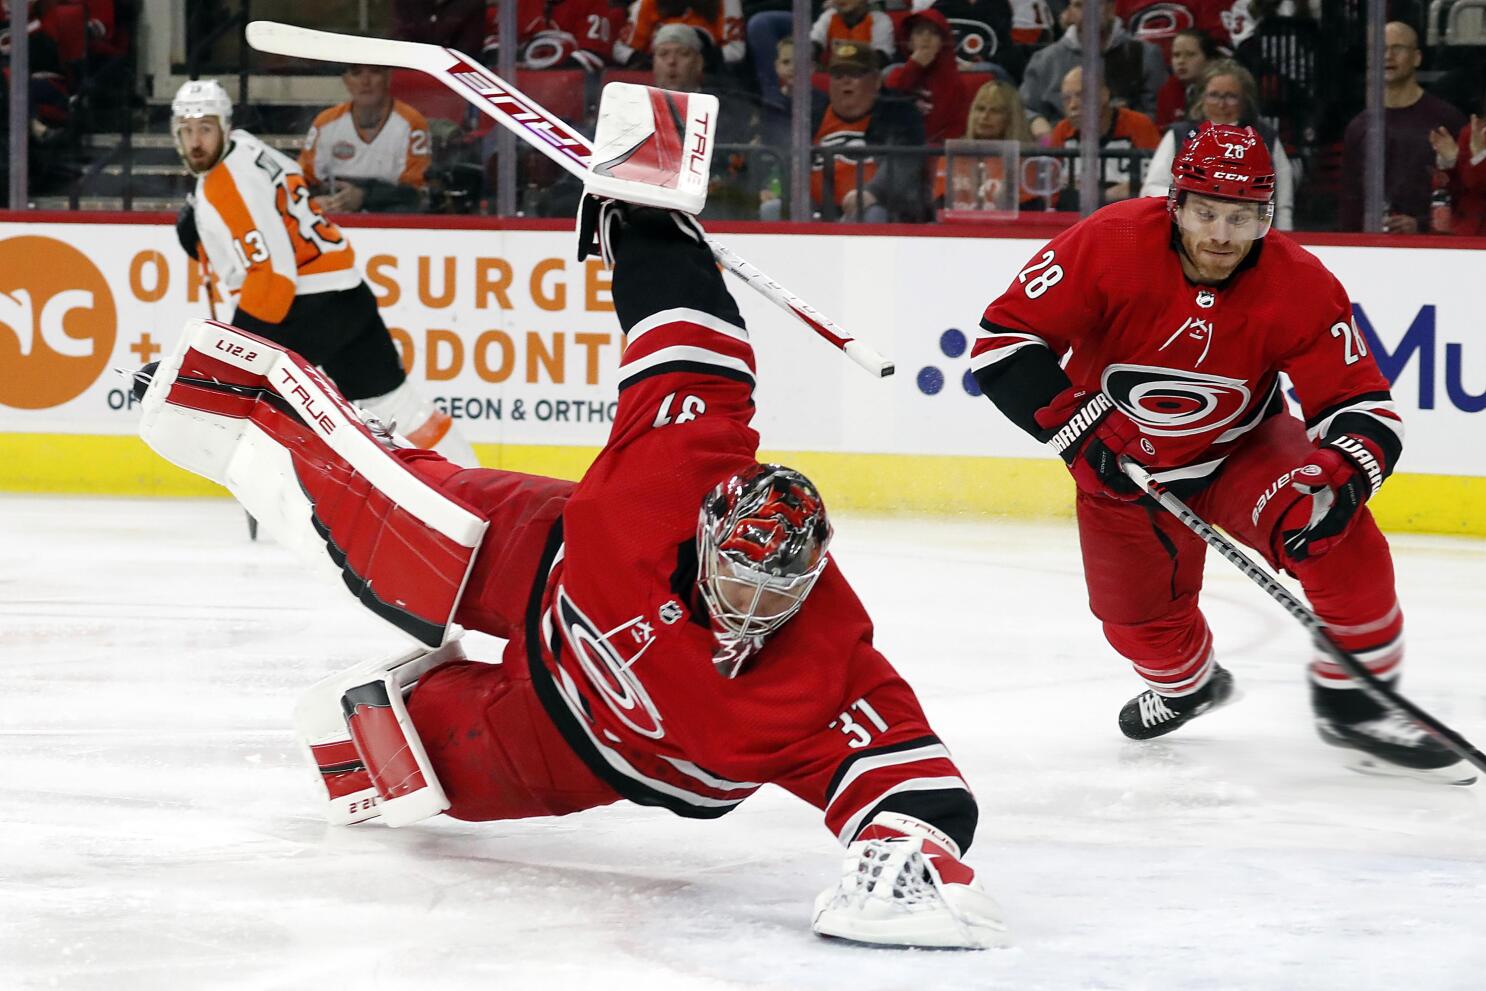 Carolina Hurricanes' Andrei Svechnikov (37) moves the puck after taking it  away from Philadelphia Flyers' Claude Giroux (28) during the second period  of an NHL hockey game in Raleigh, N.C., Saturday, March